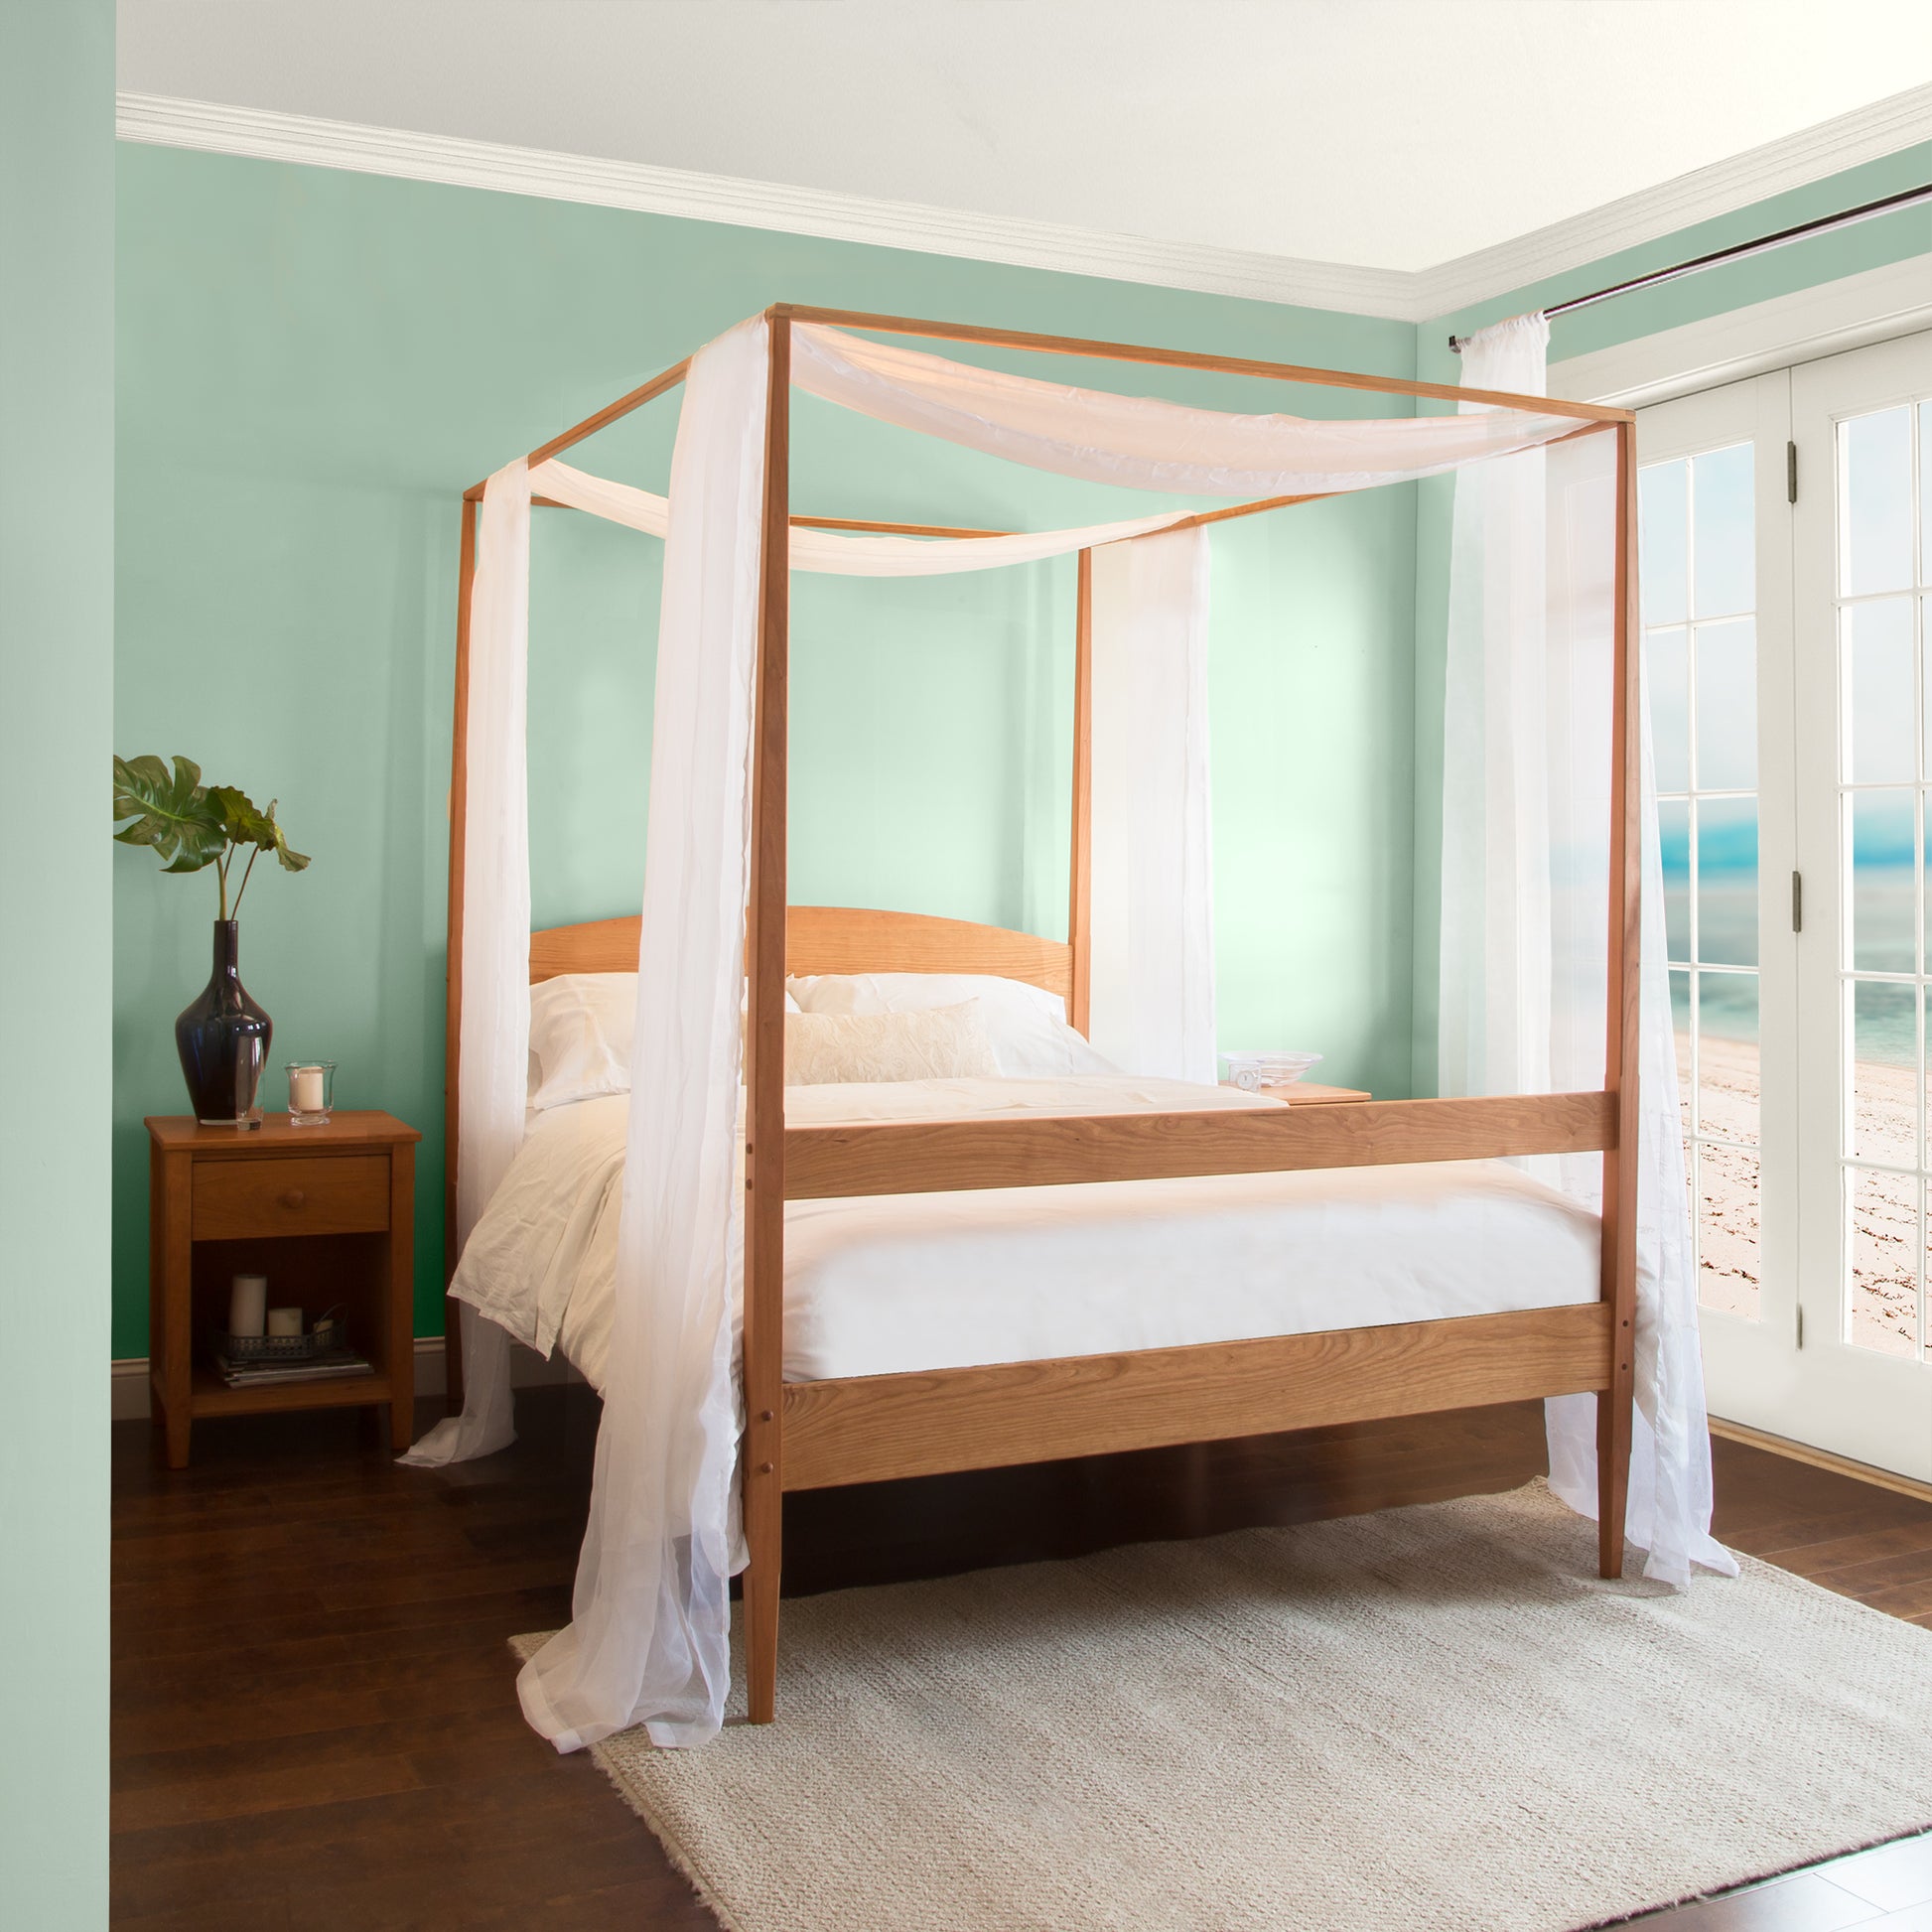 A serene bedroom featuring a Maple Corner Woodworks Vermont Shaker Four Poster Bed with Canopy draped with sheer white curtains, light teal walls, dark wooden flooring, and a small wooden side table with a plant. Large windows let